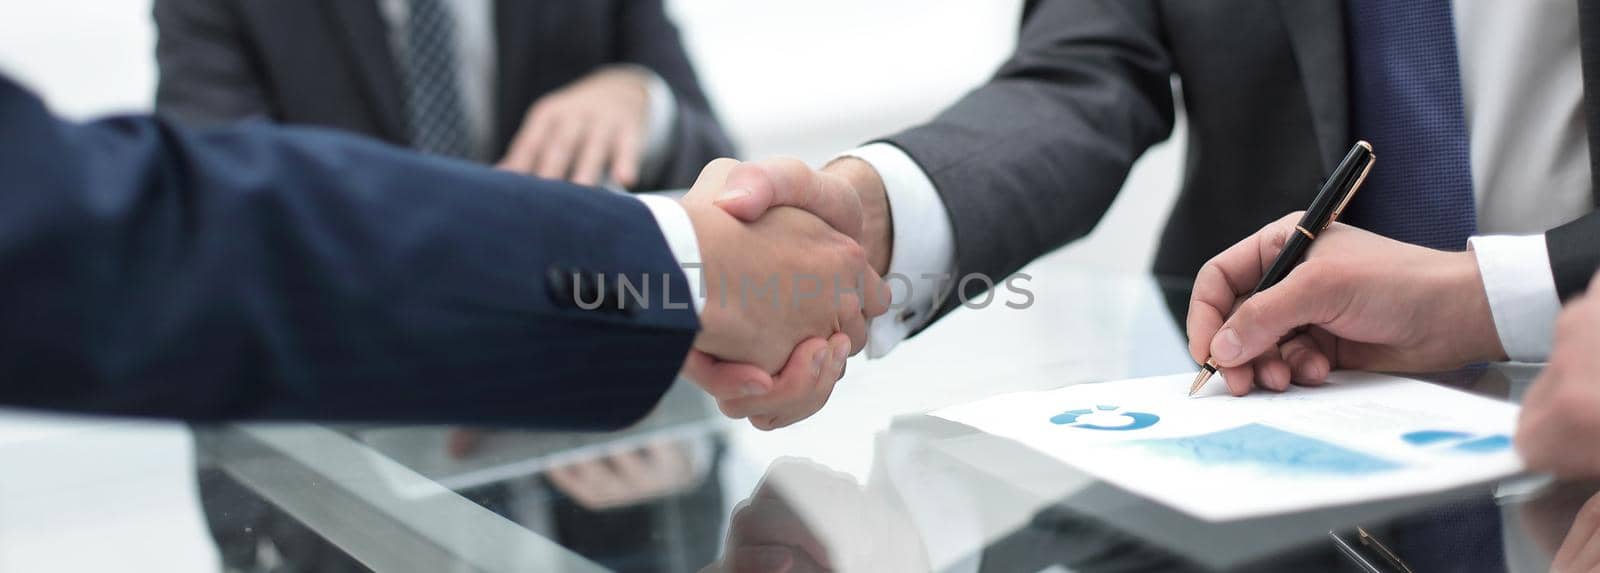 close up.handshake of business partners by asdf